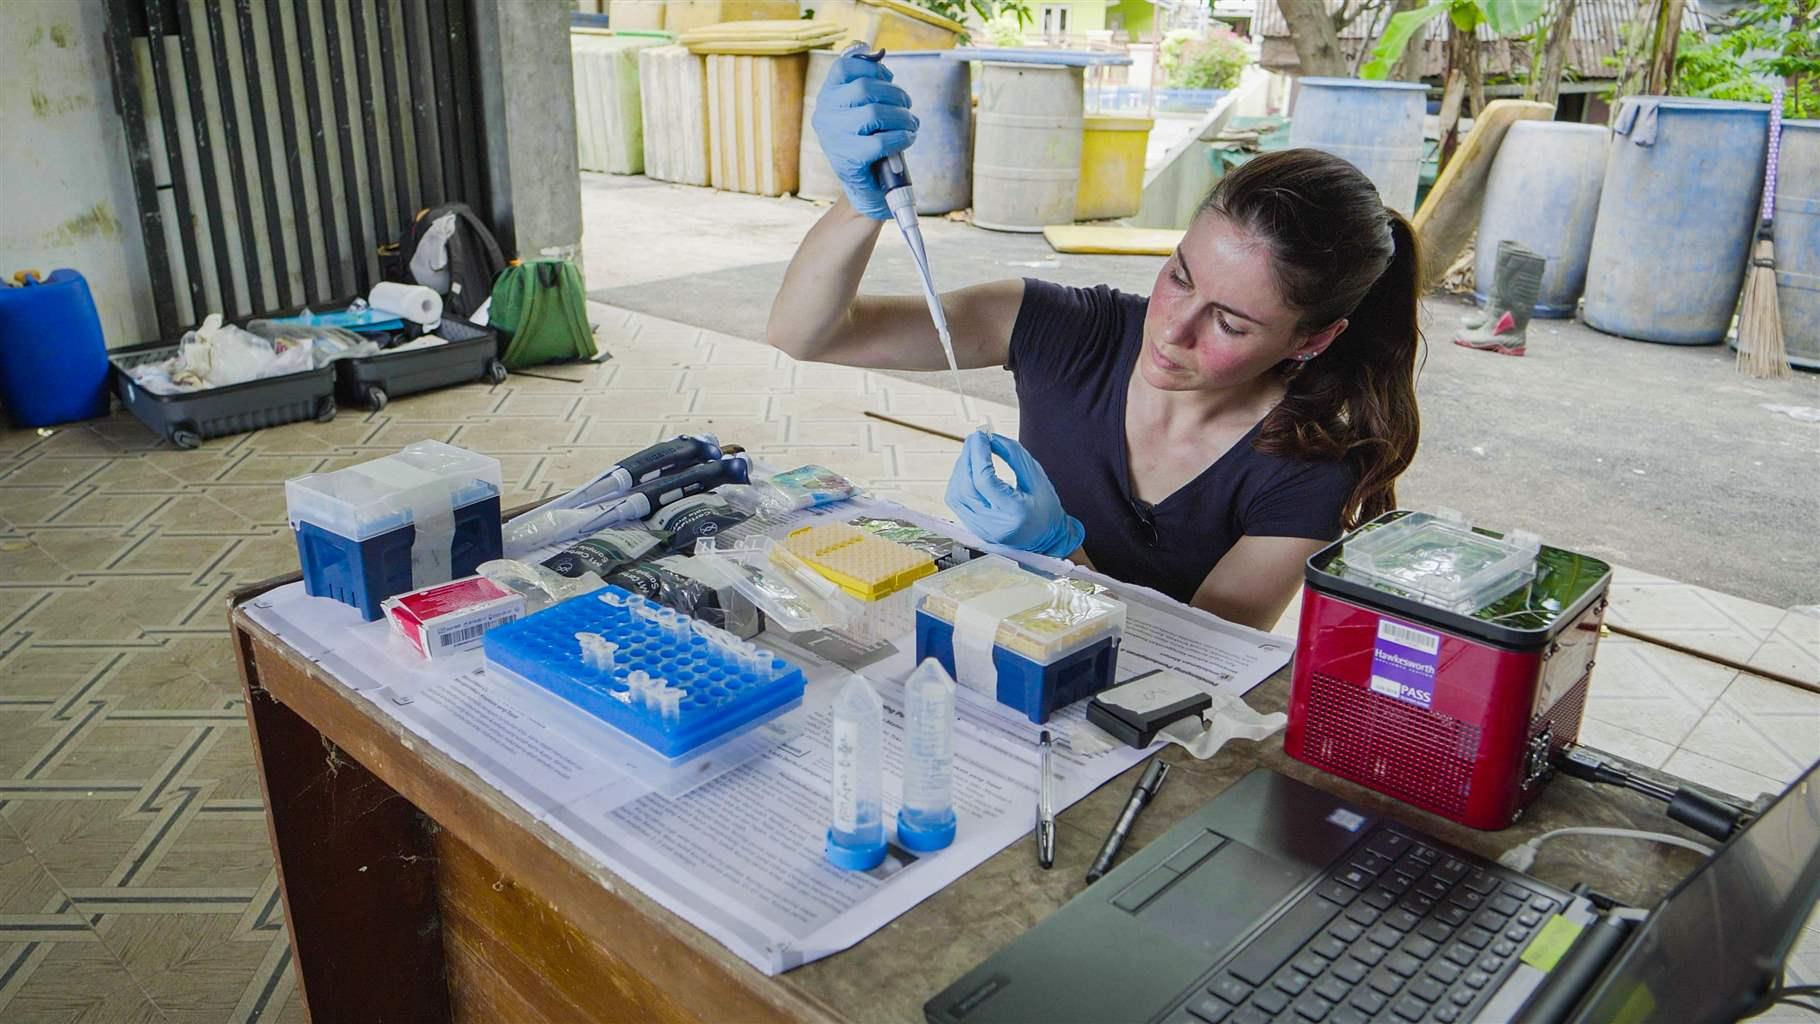 A woman holds a pipette in one hand while looking at the test tube in her other hand. She is sitting at a wooden desk with additional test tubes, a laptop, and various other items in front of her. 